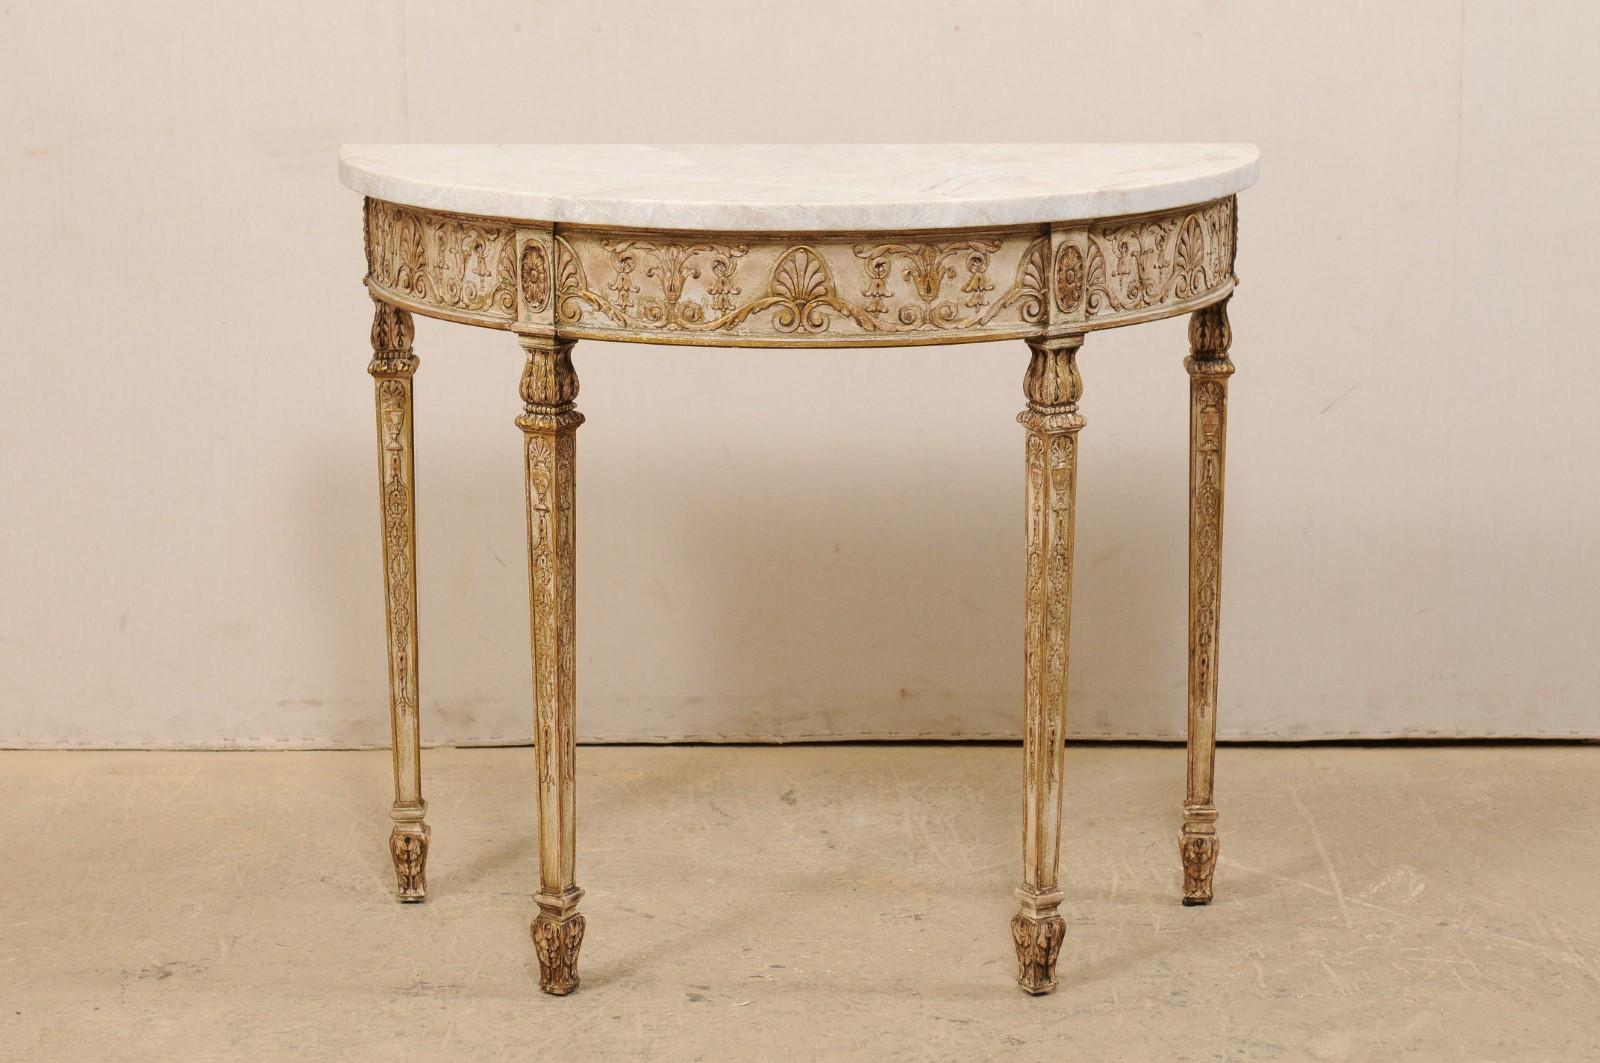 An Italian-style console demilune table from the early 20th century, with a new marble top. This antique table from furniture maker Wm Baumgarter & Co, was designed with Italian aesthetic, featuring a half-moon top with an exquisite carved apron